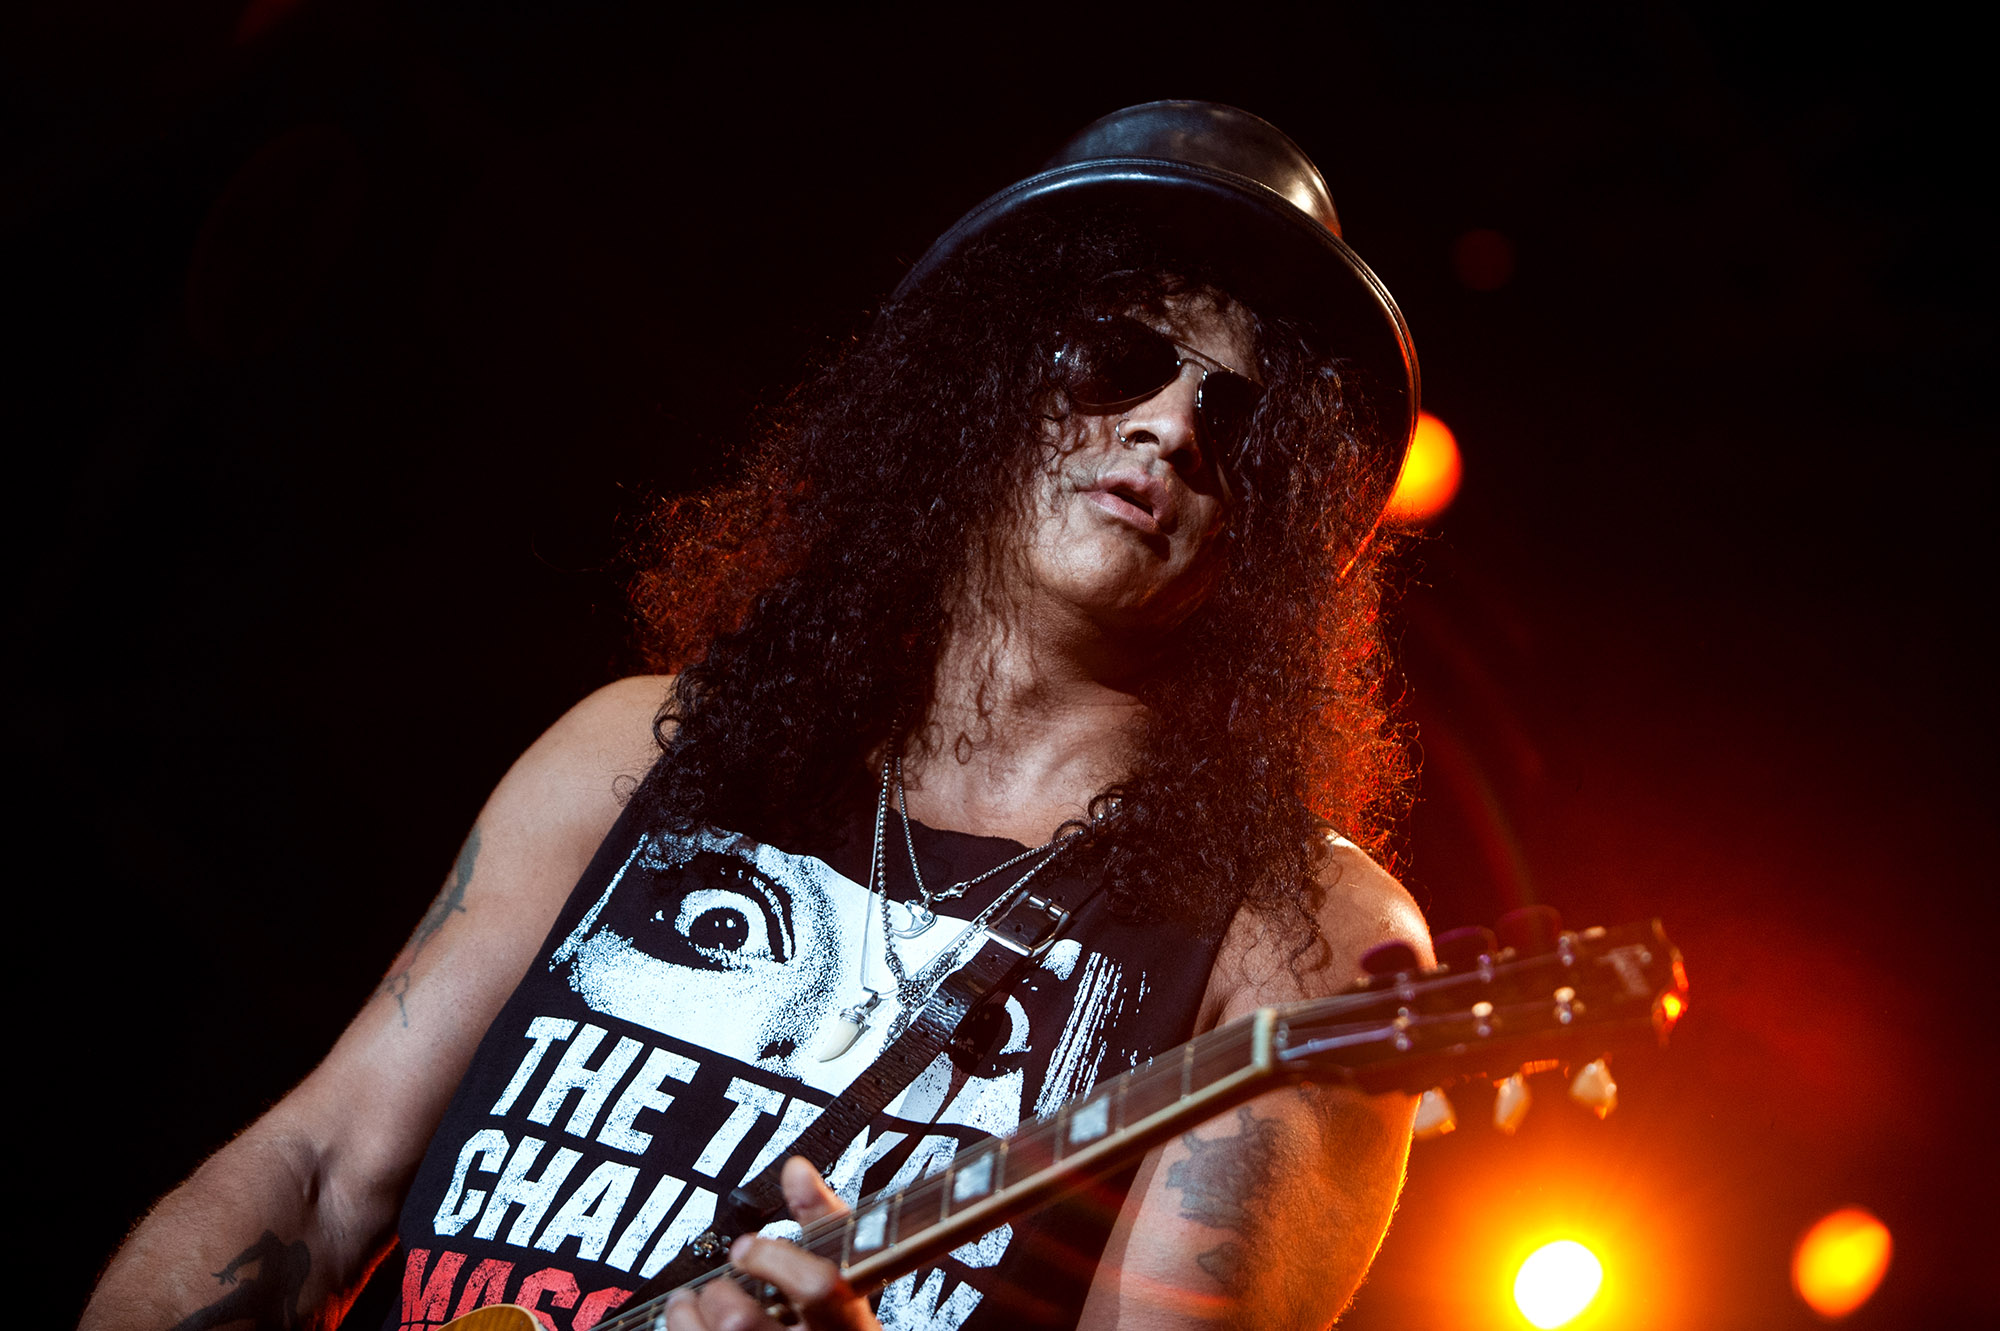 Milan  Italy  28 July 2011,Live concert of Slash at the Arena Civica : Slash during the concert